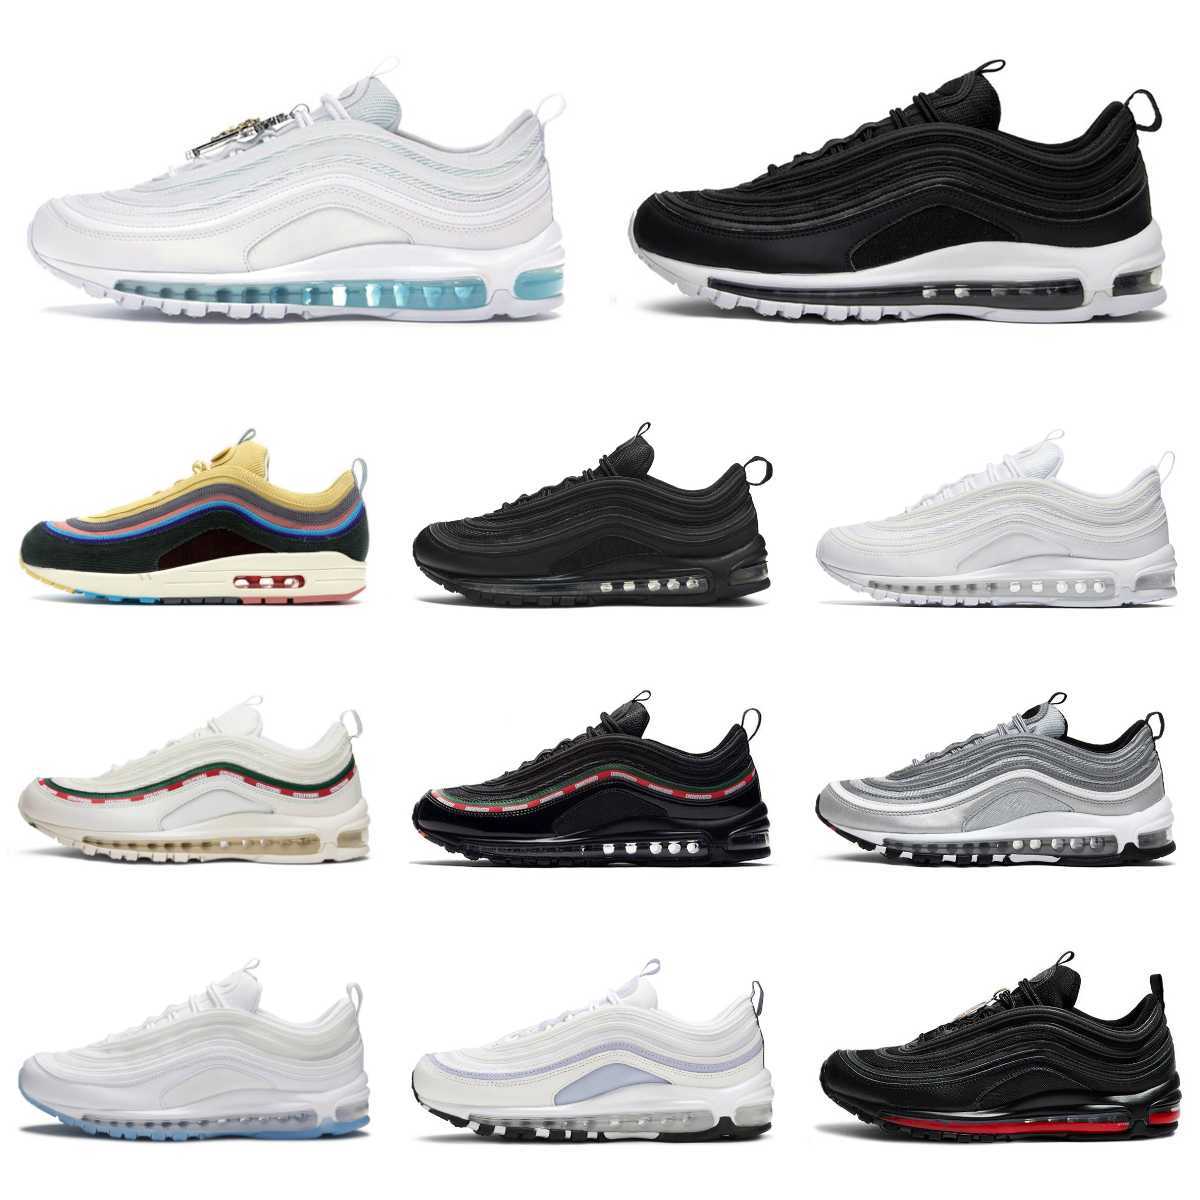 

Trainers Max 97 Mens Casual Shoes MSCHF X INRI Jesus Undefeated Black Crucifix Triple White Metalic Women Designer Air 97s Sean Wotherspoon Sliver Bullet Sneakers, #27 celestial gold